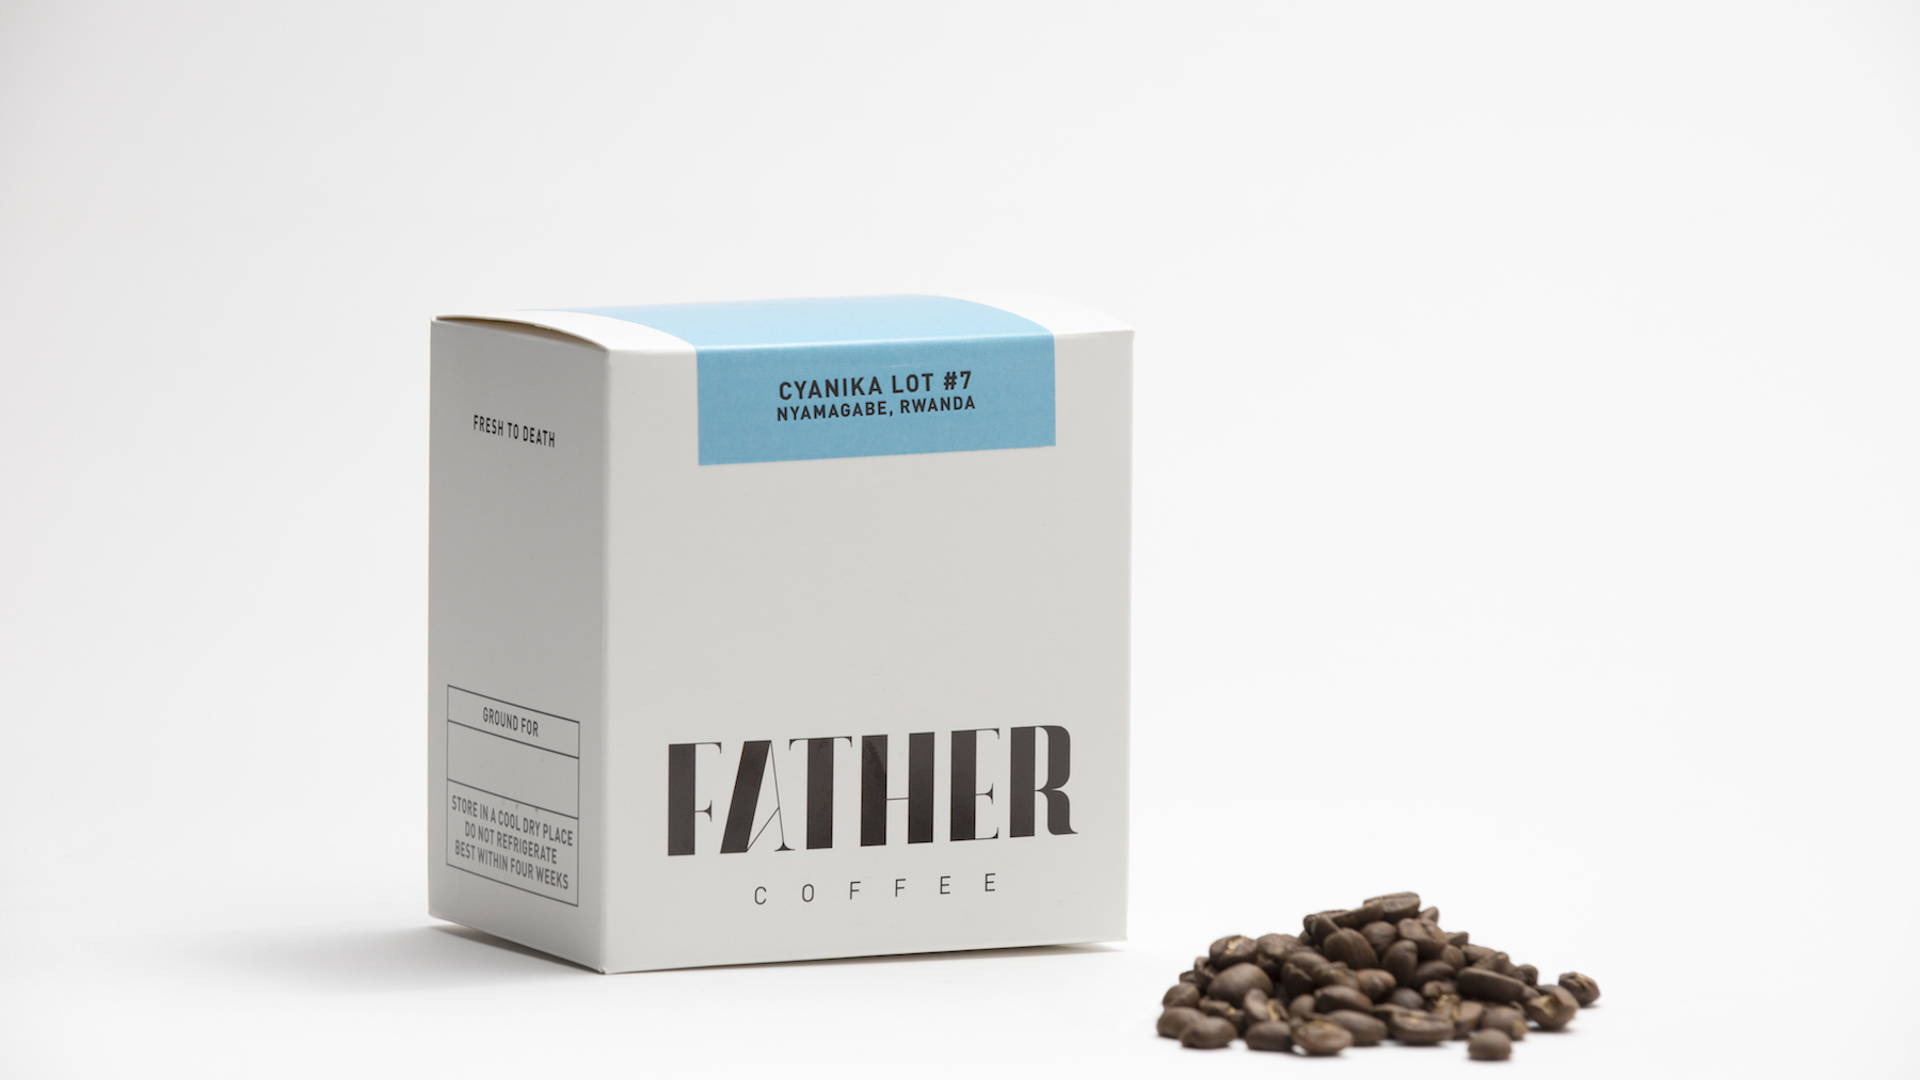 Featured image for Father Coffee Packaging 